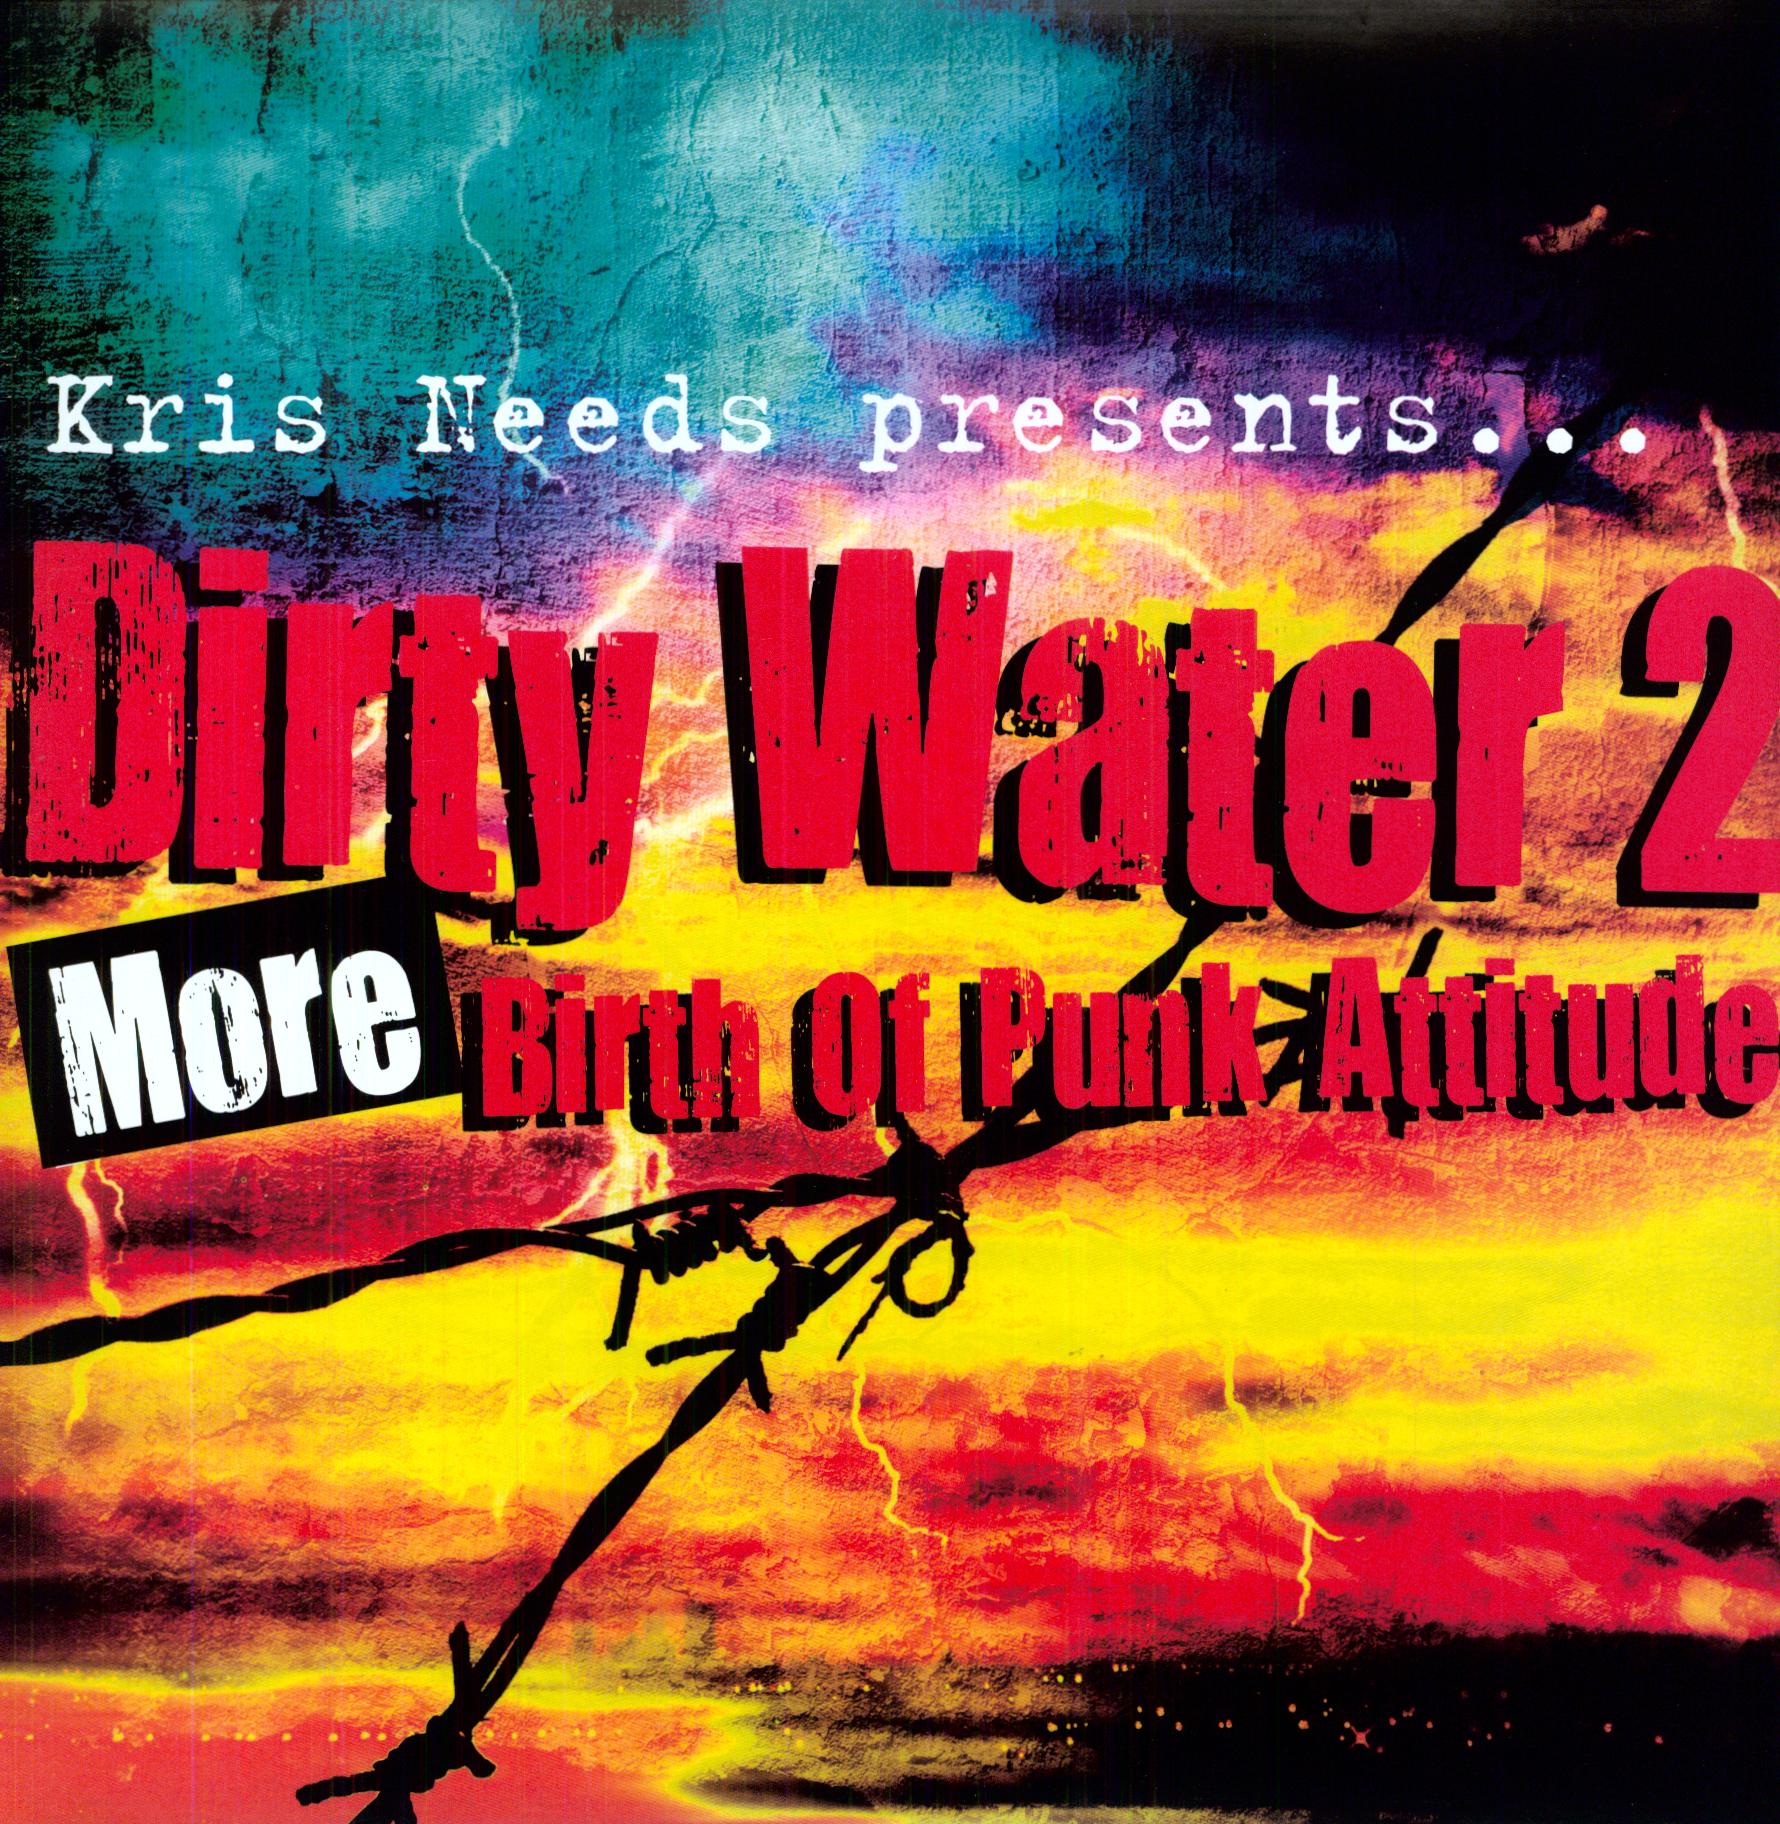 DIRTY WATER 2: MORE BIRTH OF PUNK ATTITUDE / VAR